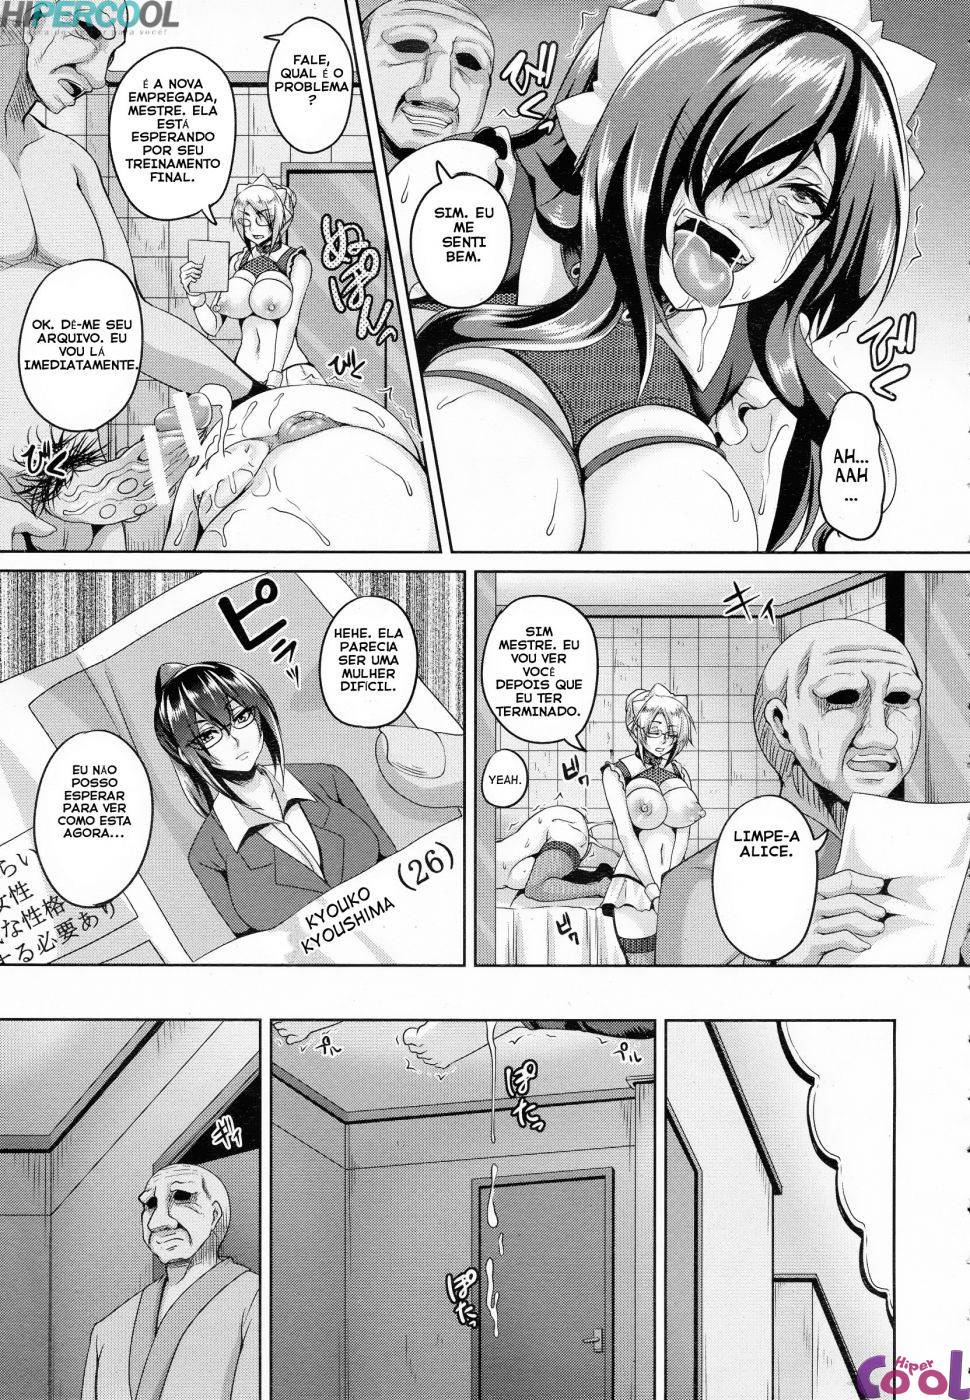 maid-rei-collection-chapter-01-page-03.jpg